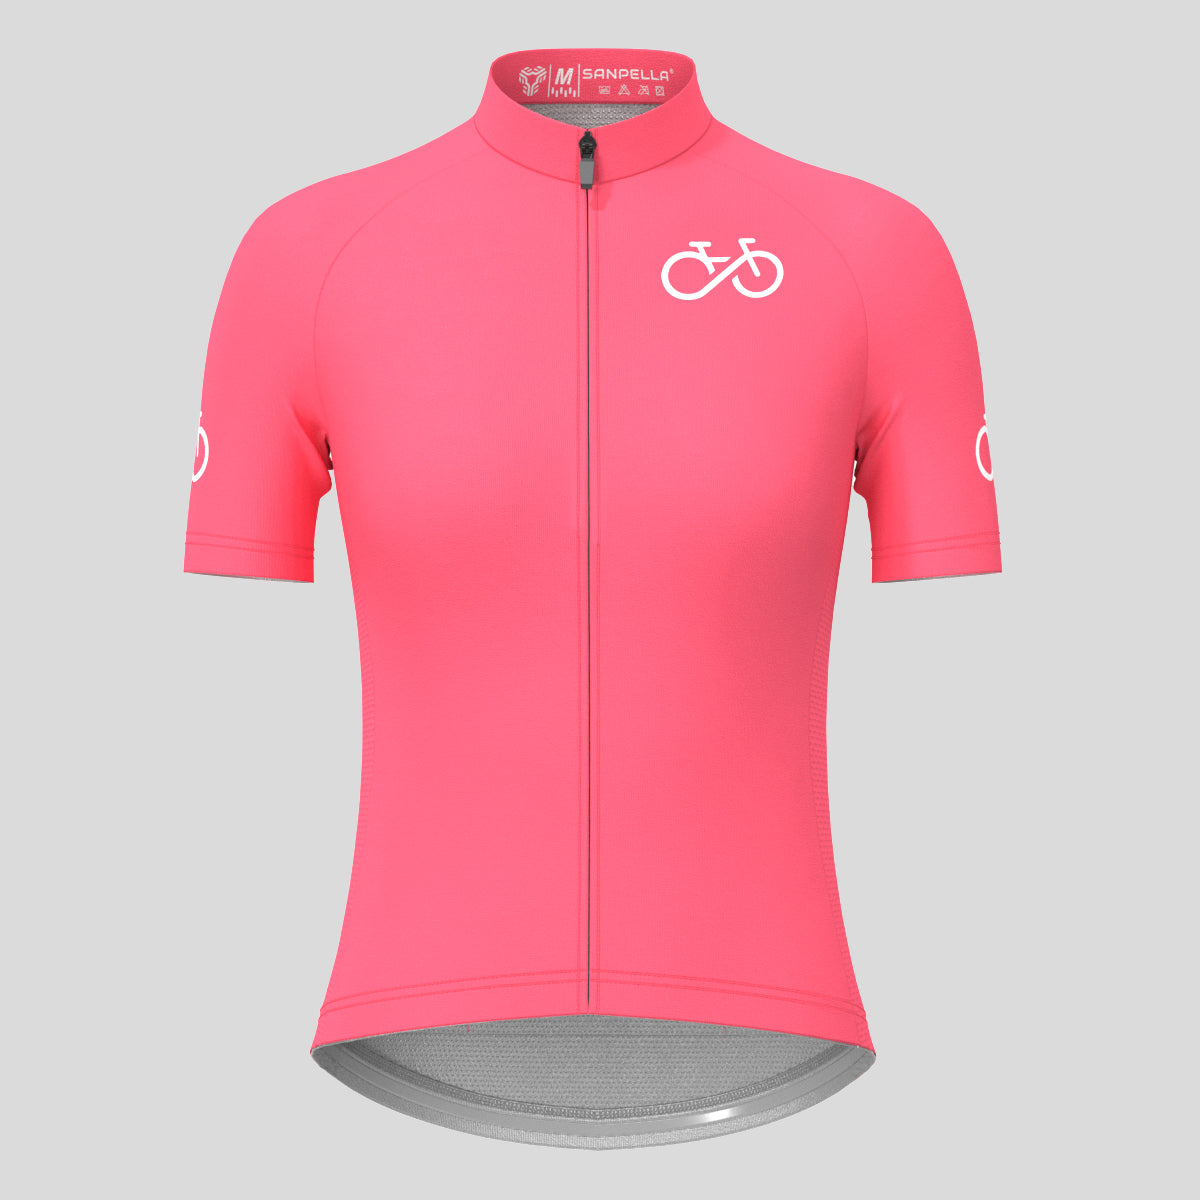 Ride Forever Women's Cycling Jersey - Pink